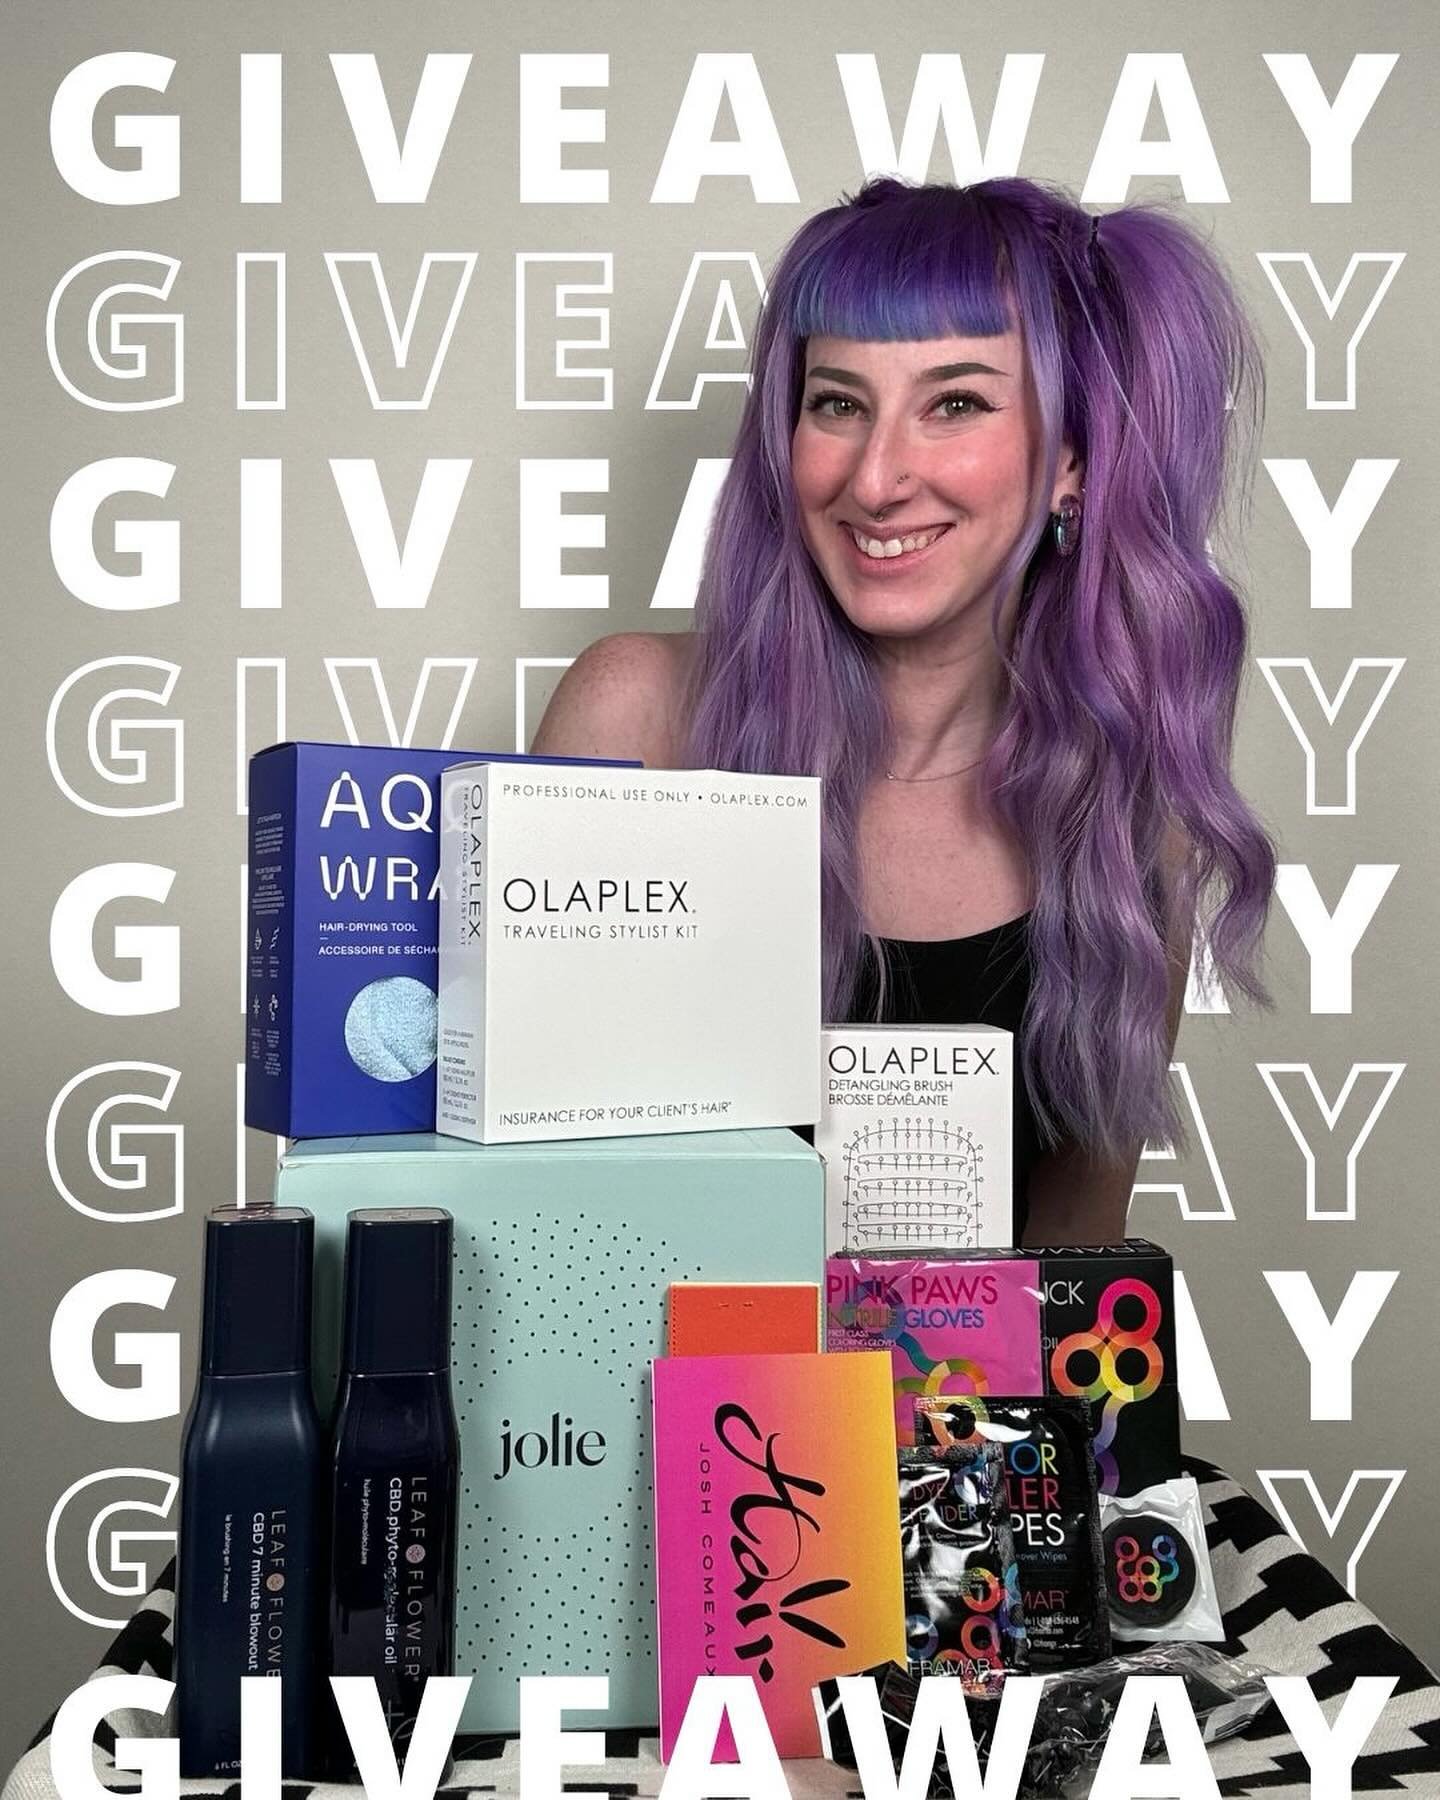 🌟 RAFFLE ALERT! 🌟 Ready to win big while supporting a great cause? I&rsquo;m excited to announce a special raffle with 4 WINNERS! 🎉

May is Lupus Awareness Month and technically 4/30 is hairstylist appreciation day (according to Google)! So I want